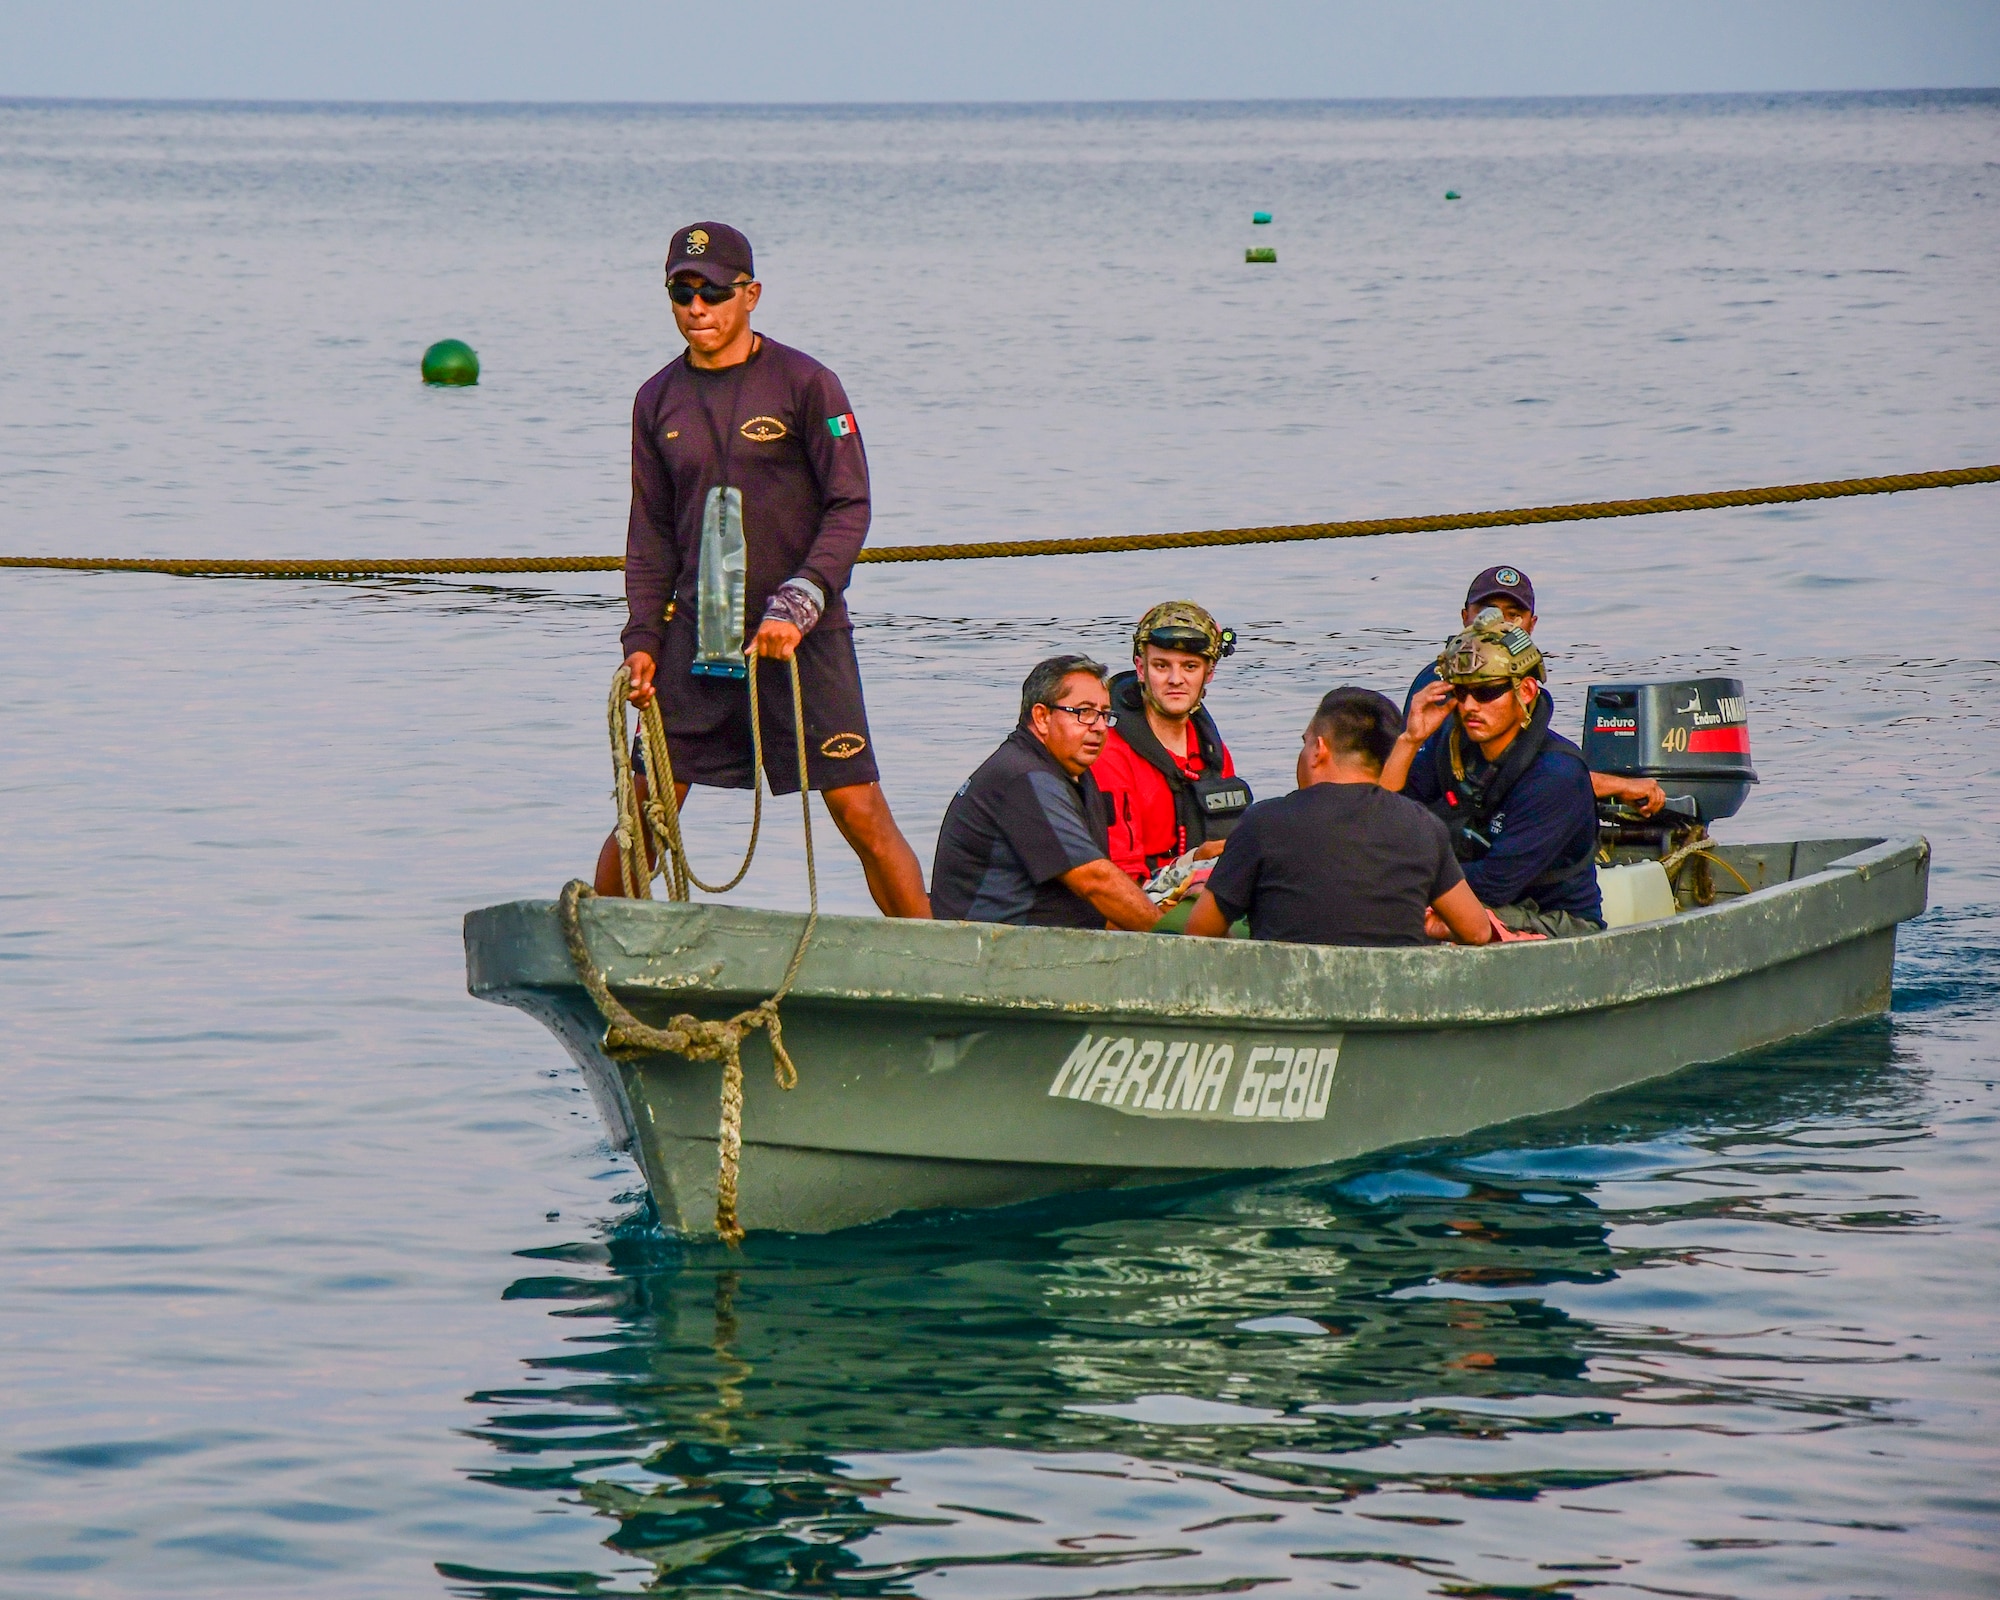 Pararescuemen from the 48th Rescue Squadron, Davis-Monthan Air Force Base, Arizona, along with injured fishermen are transported from the Tamara, a fishing vessel, to Socorro Island, Mexico, July 12, 2019. The pararescuemen cared for fishermen, who were injured when a 25-ton crane fell on them. A Travis AFB, California, KC-10 Extender refueled the HC-130J over the Pacific Ocean enabling it to make it to the Tamara. (U.S. Air Force photo by Airman 1st Class Kristine Legate)